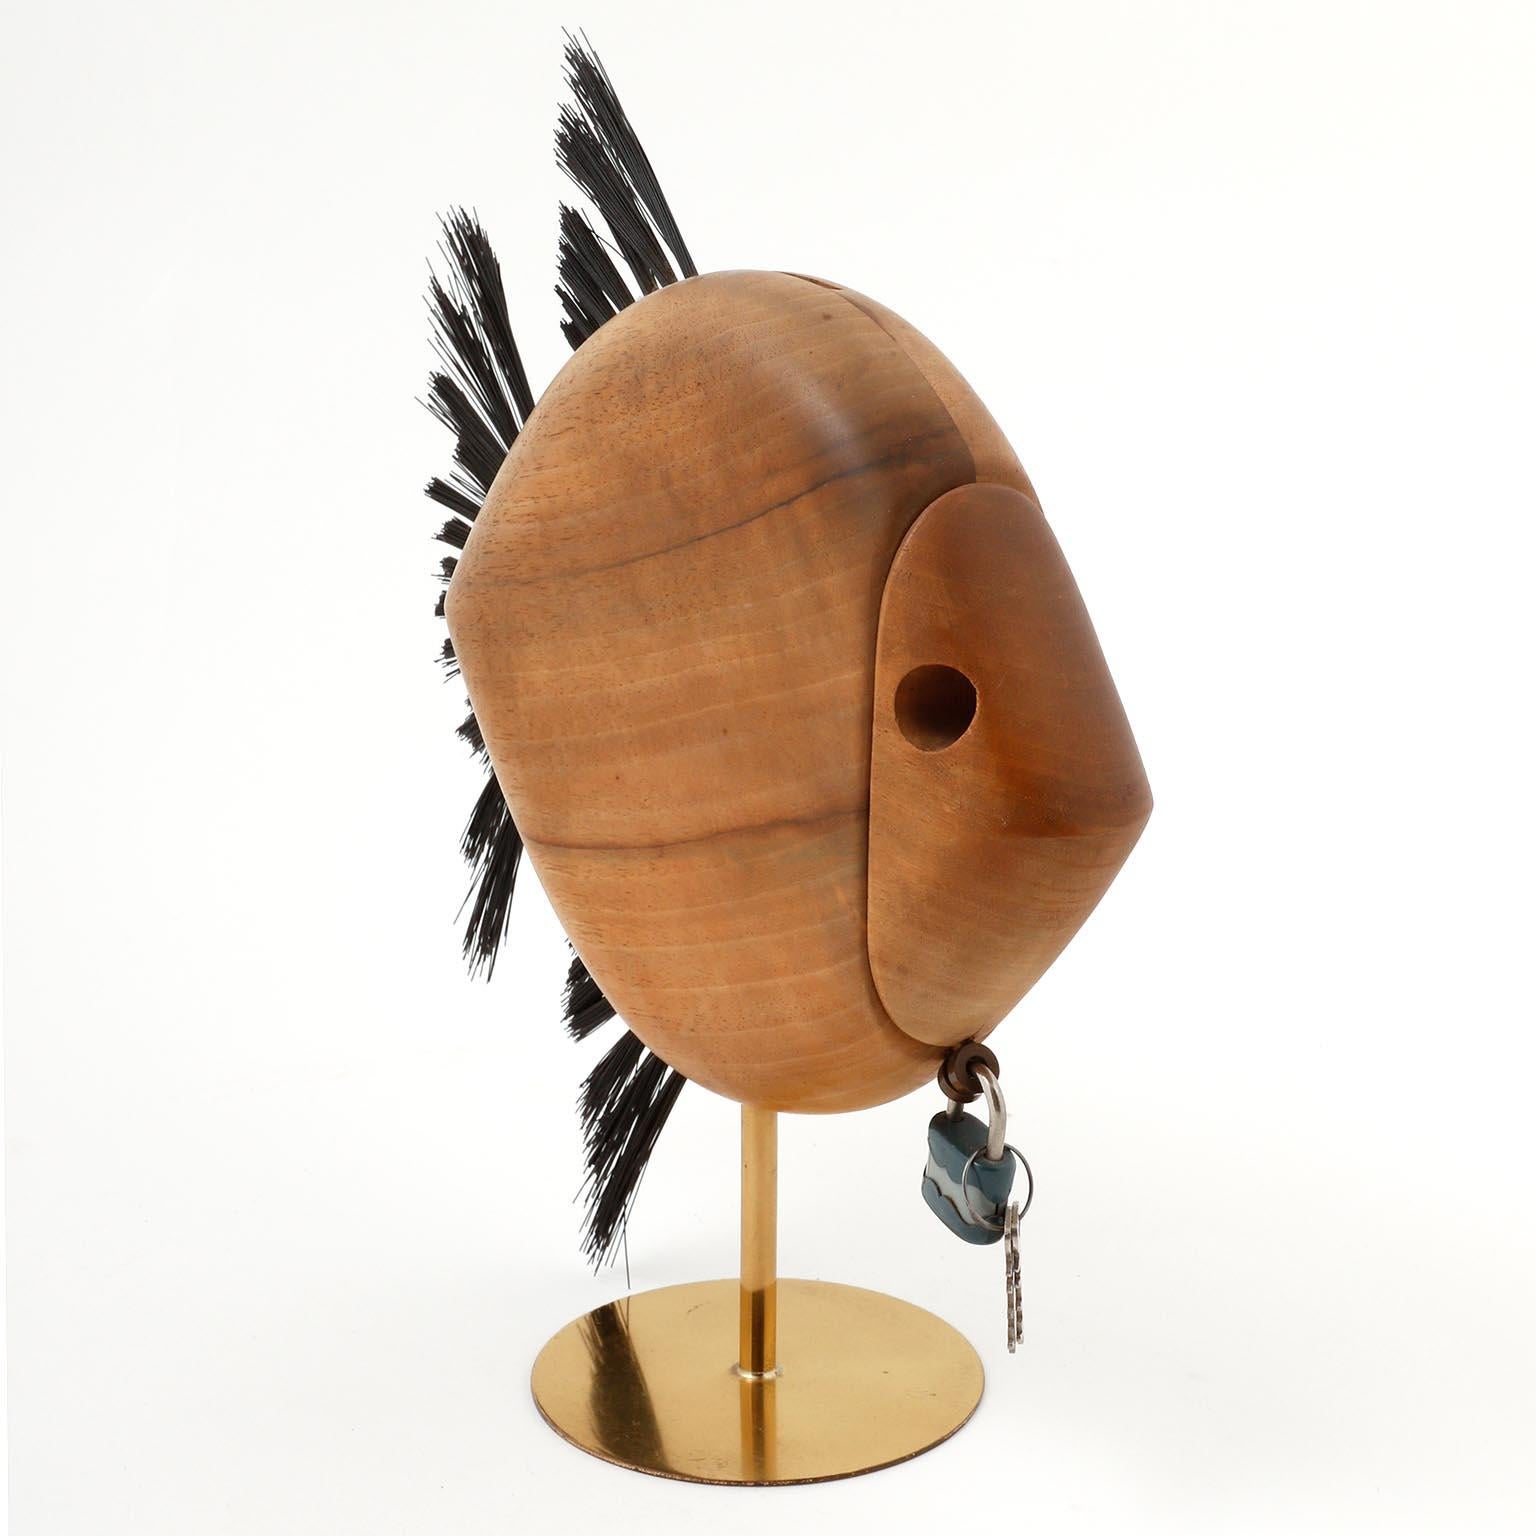 A money box in the form of a fish made of walnut, brass and horse hair designed by Carl Auböck, manufactured by Carl Auböck workshop in midcentury, Vienna, circa 1960.
An authentic handmade piece in very good original condition with nice patina on